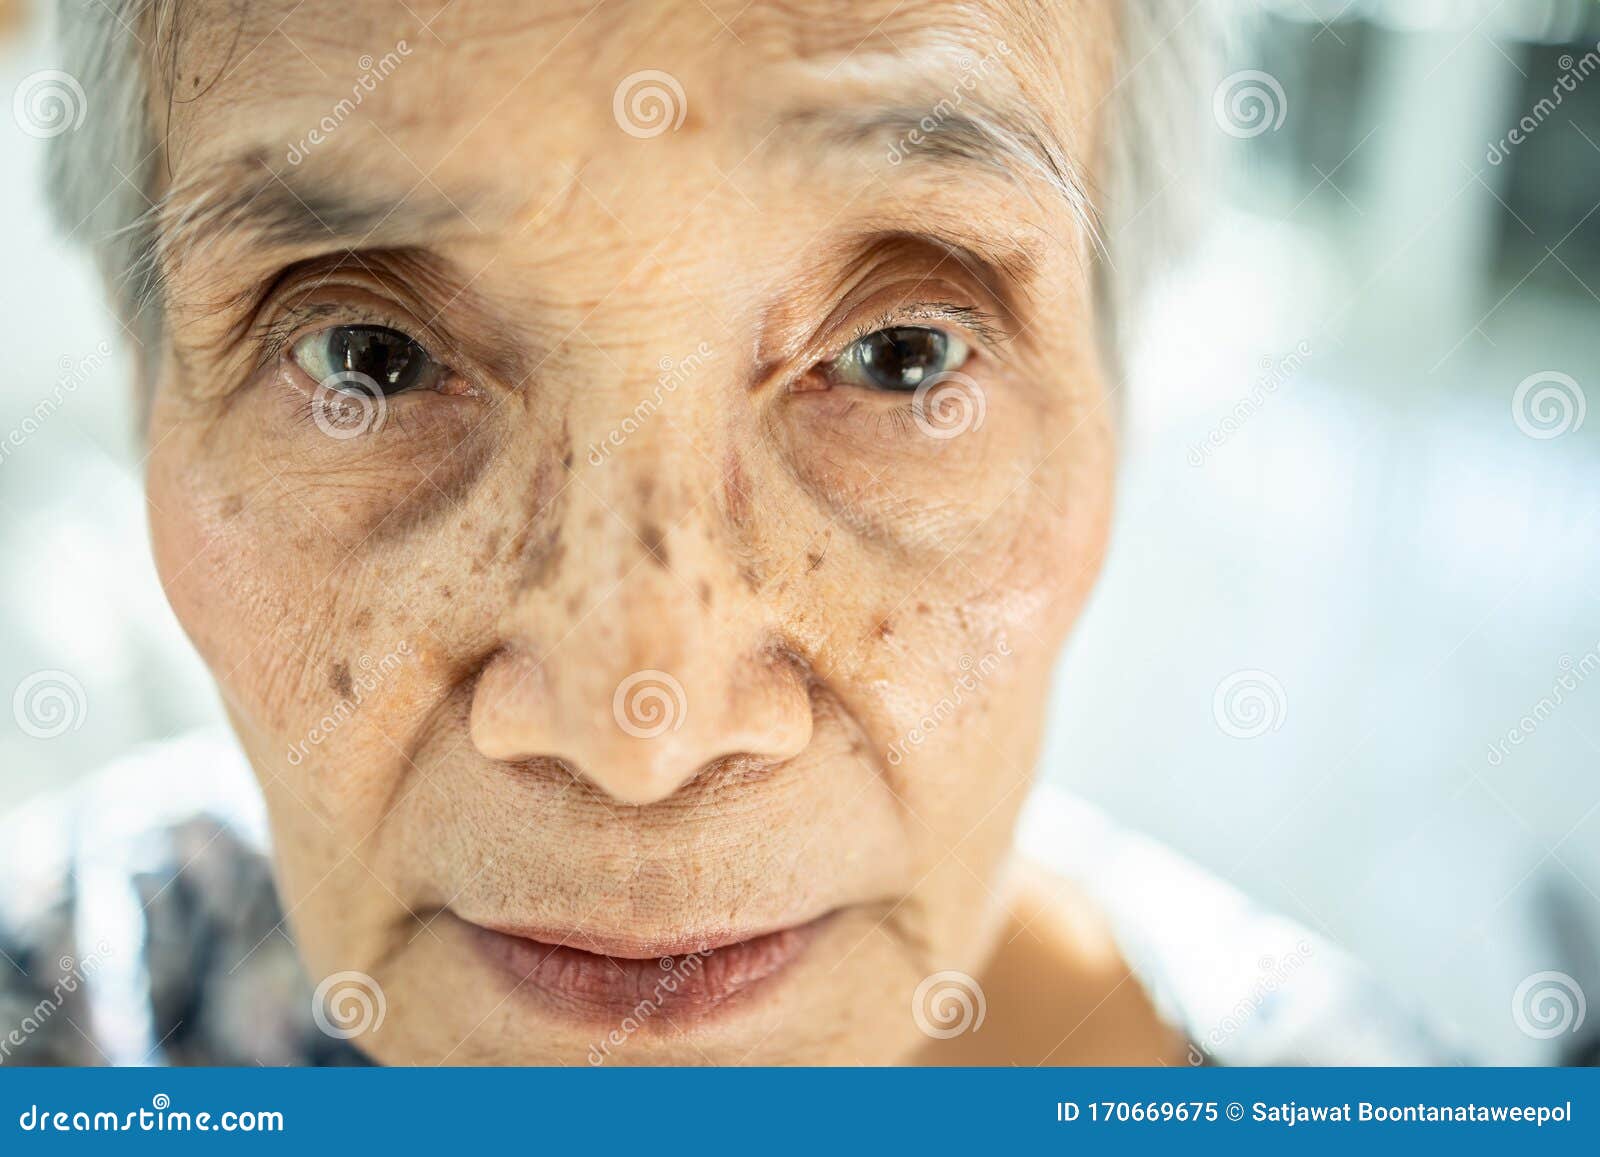 exhausted asian senior woman suffering from insomnia,.chronic insomnia or allergies causing her sunken eye, dark circles, blear